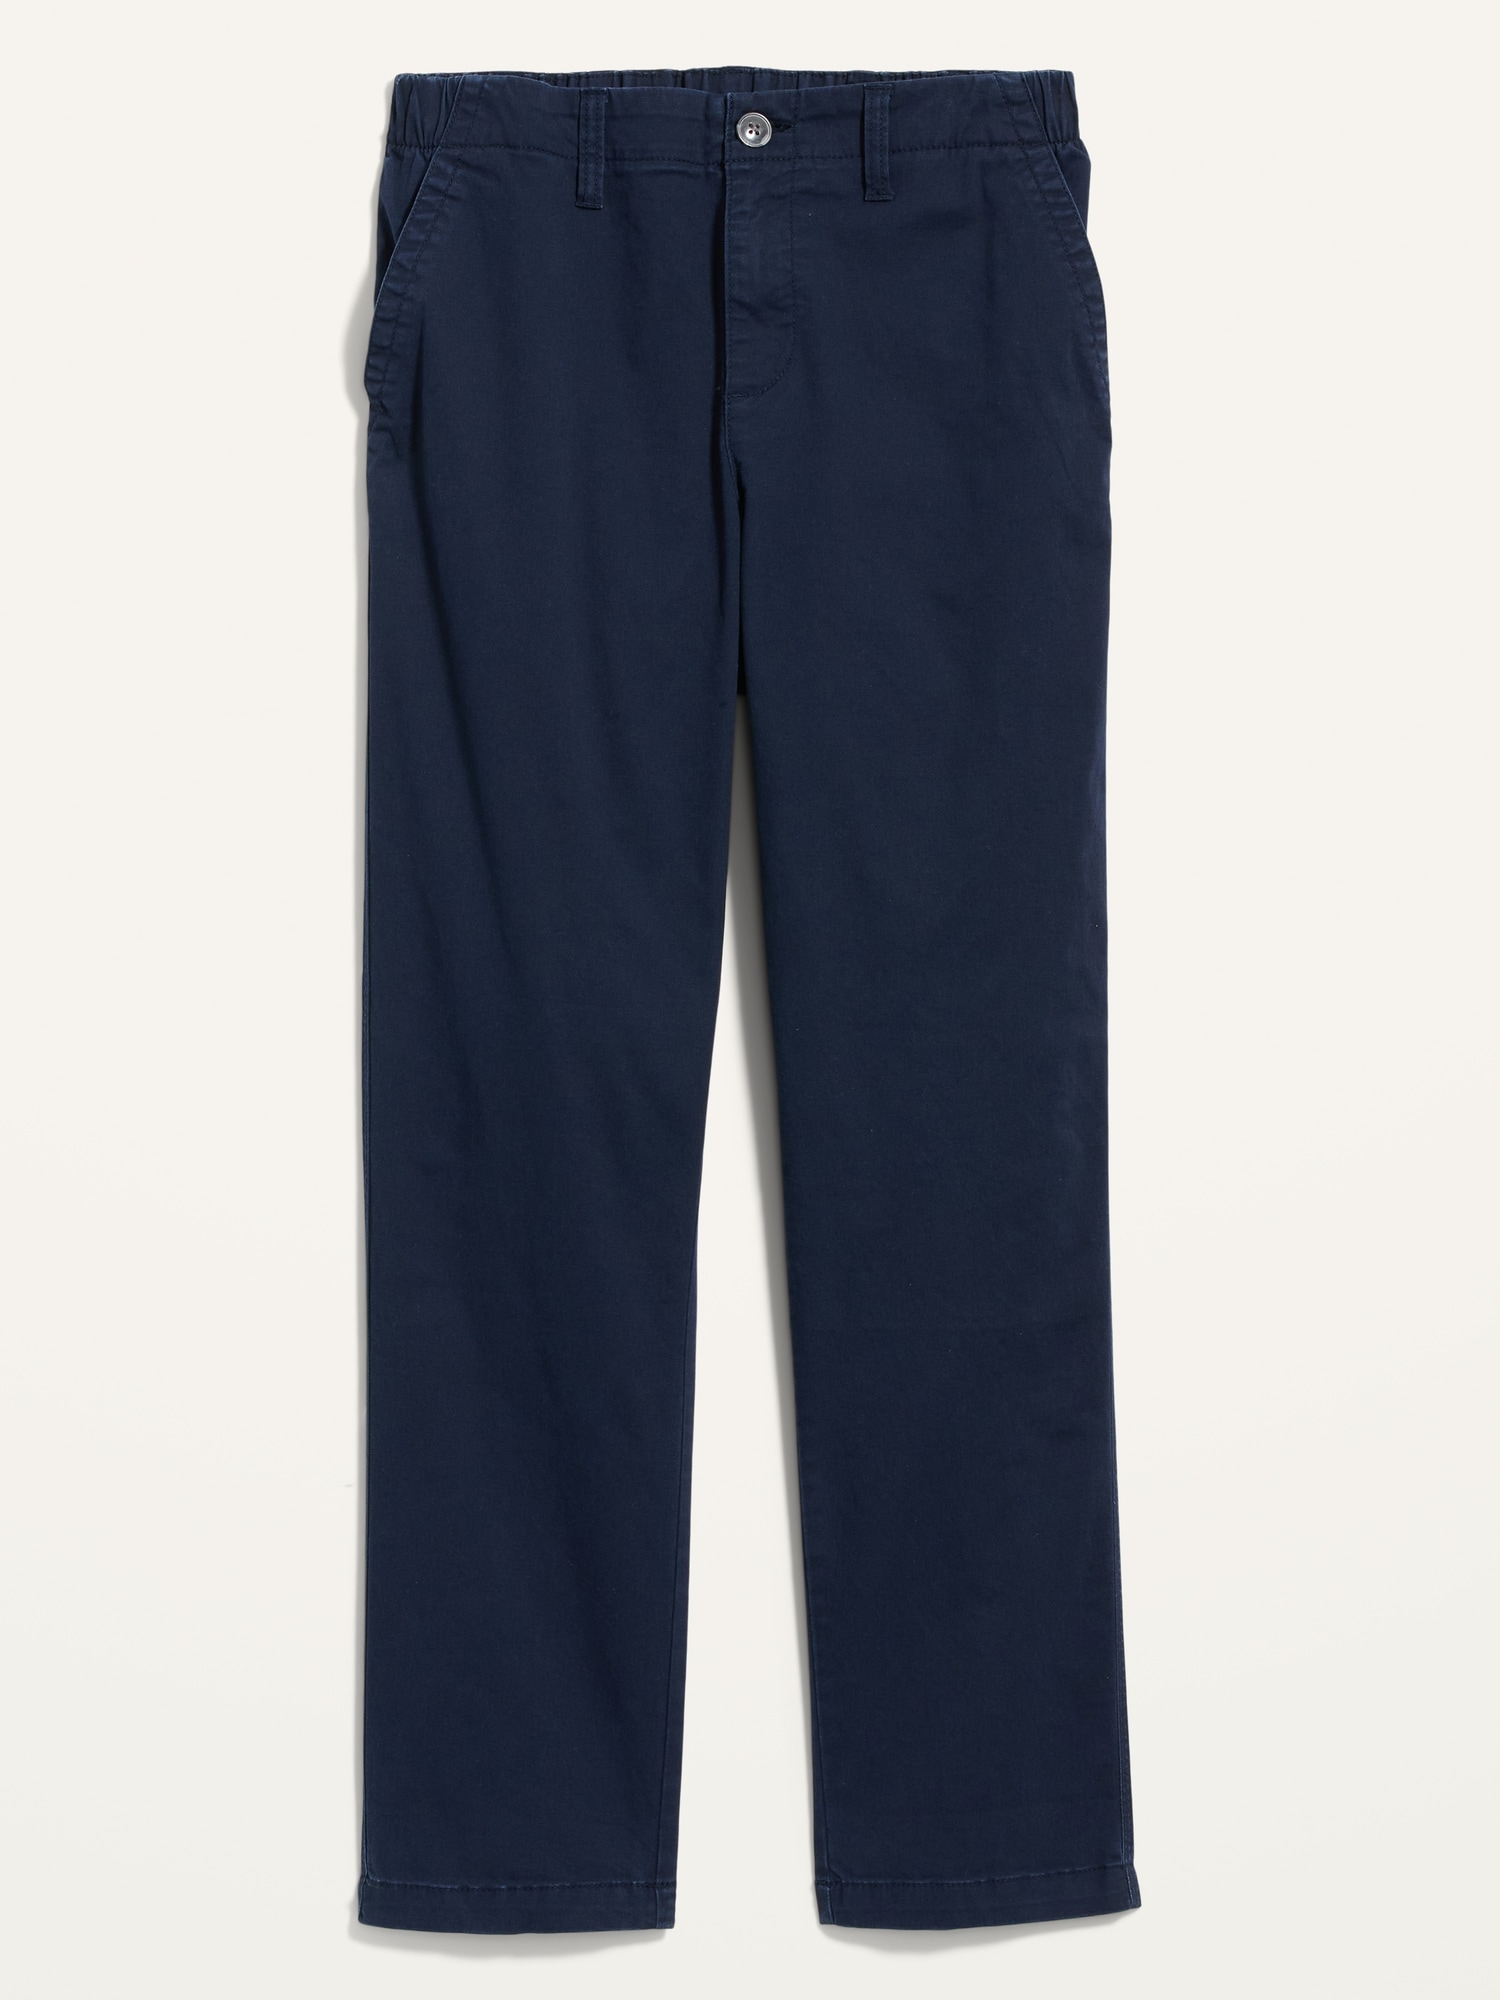 Old Navy, Pants & Jumpsuits, Nwt High Waisted Ogc Chino Pants For Women